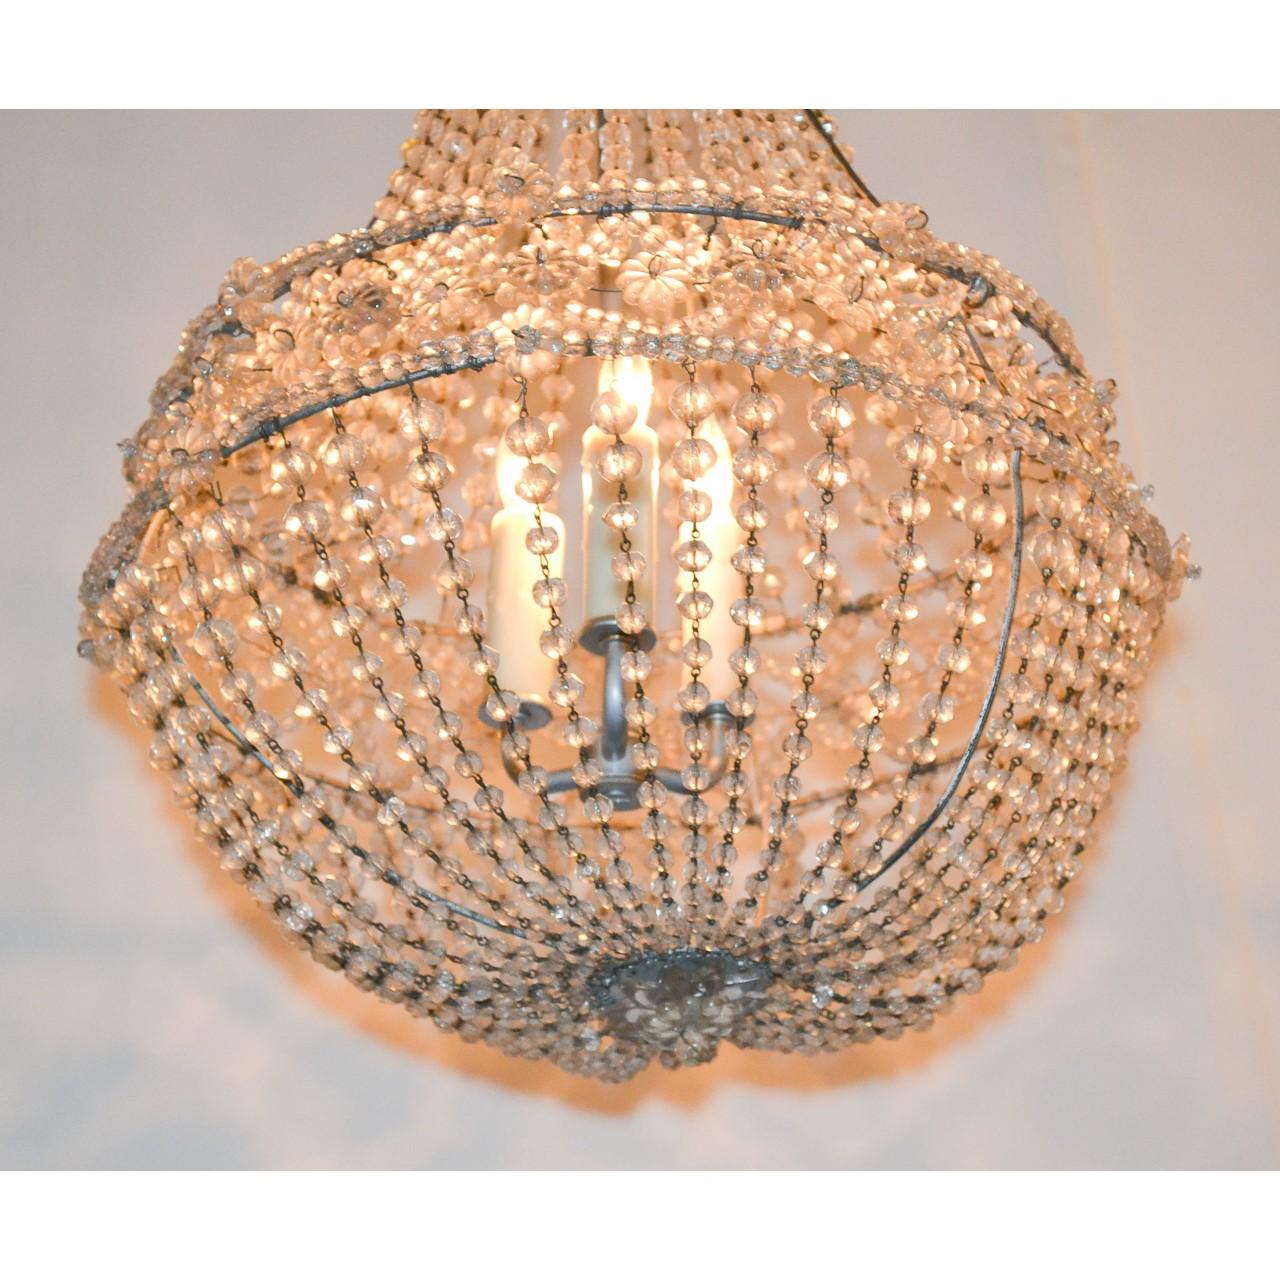 Lovely French crystal basket chandelier. The top with cascades of bead crystals leading to a central band accented with crystal rosettes. The basket-form base draped with multiple strands of bead cut crystals,

circa 1920.